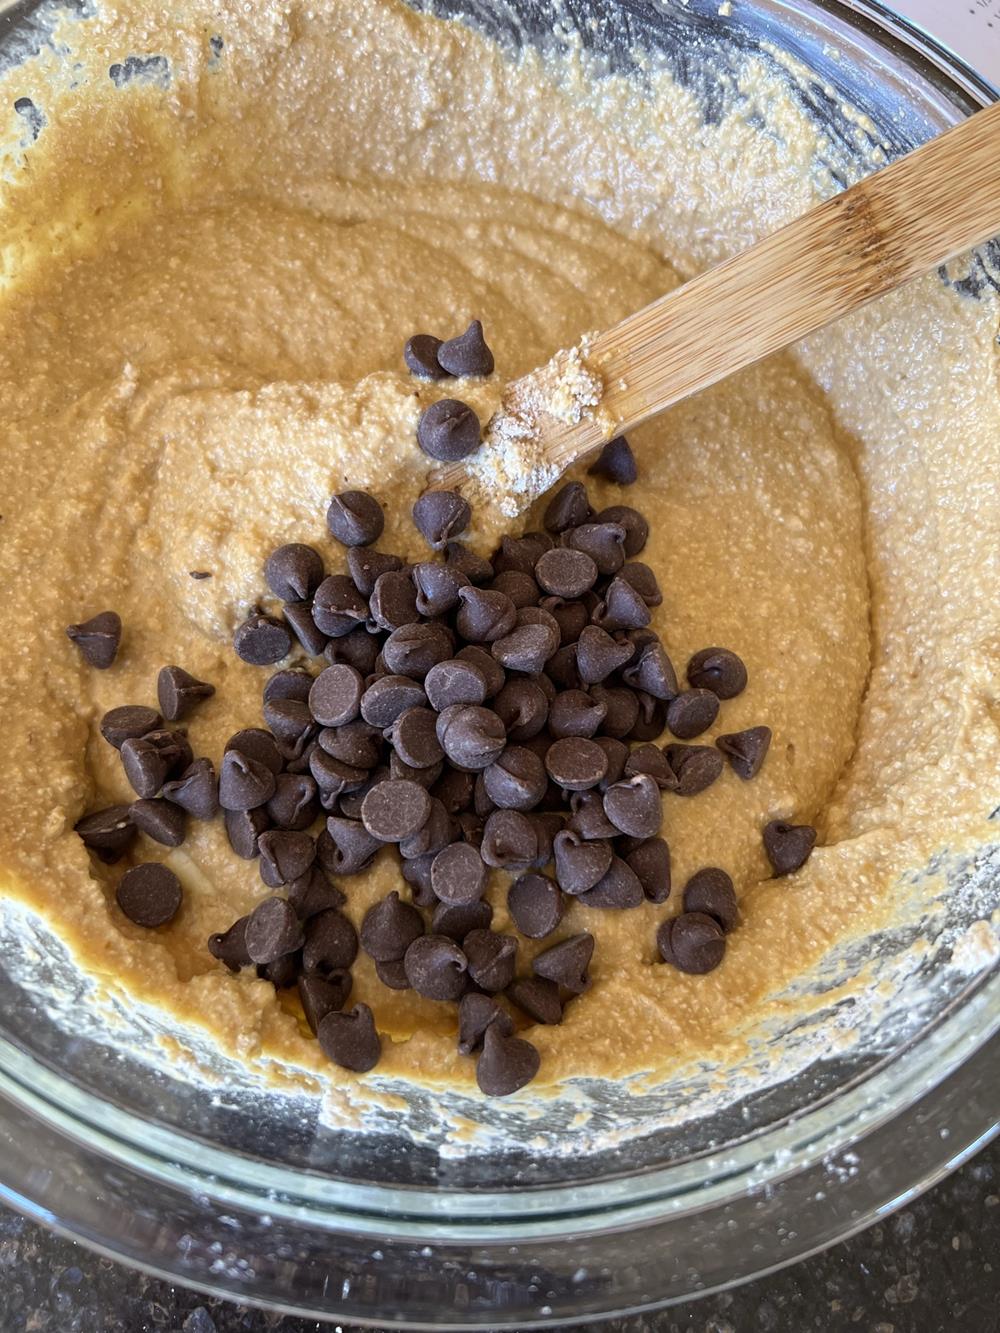 Oatmeal Pumpkin Muffins batter with Chocolate Chips in a bowl